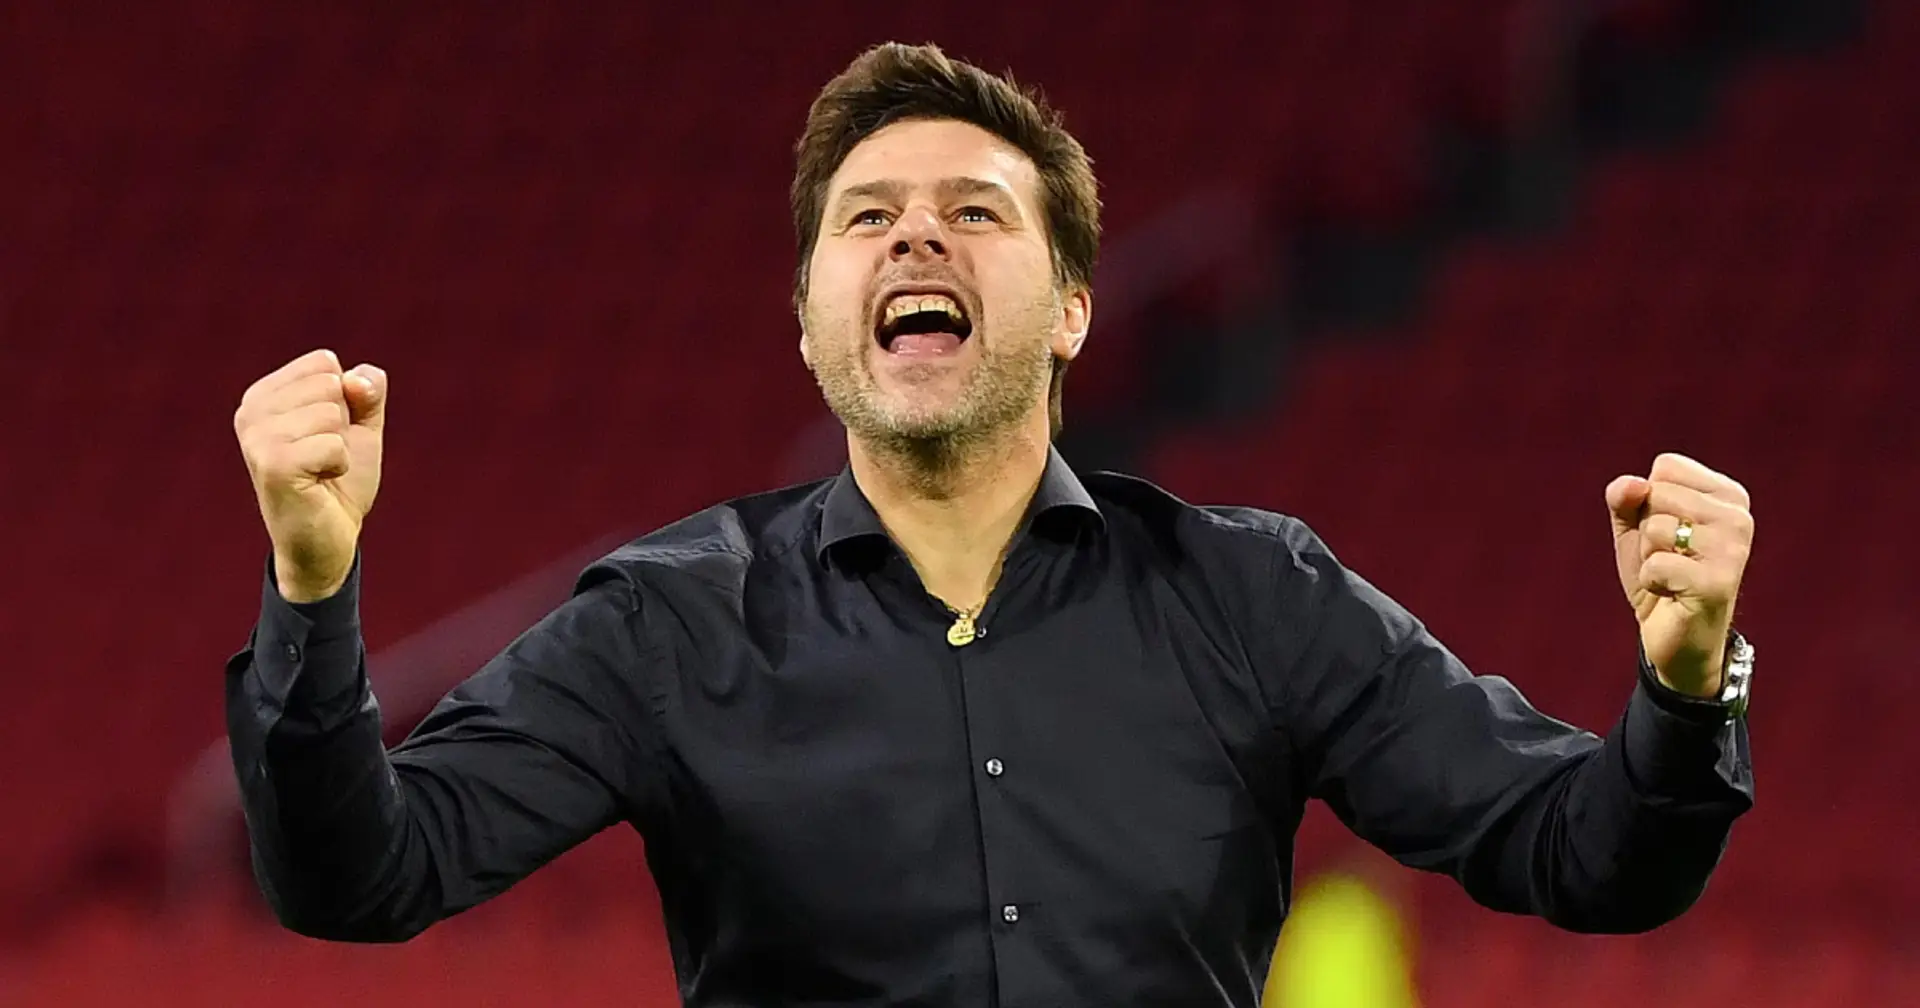 'Best name left on shortlist': some Chelsea fans warming to Pochettino as next manager